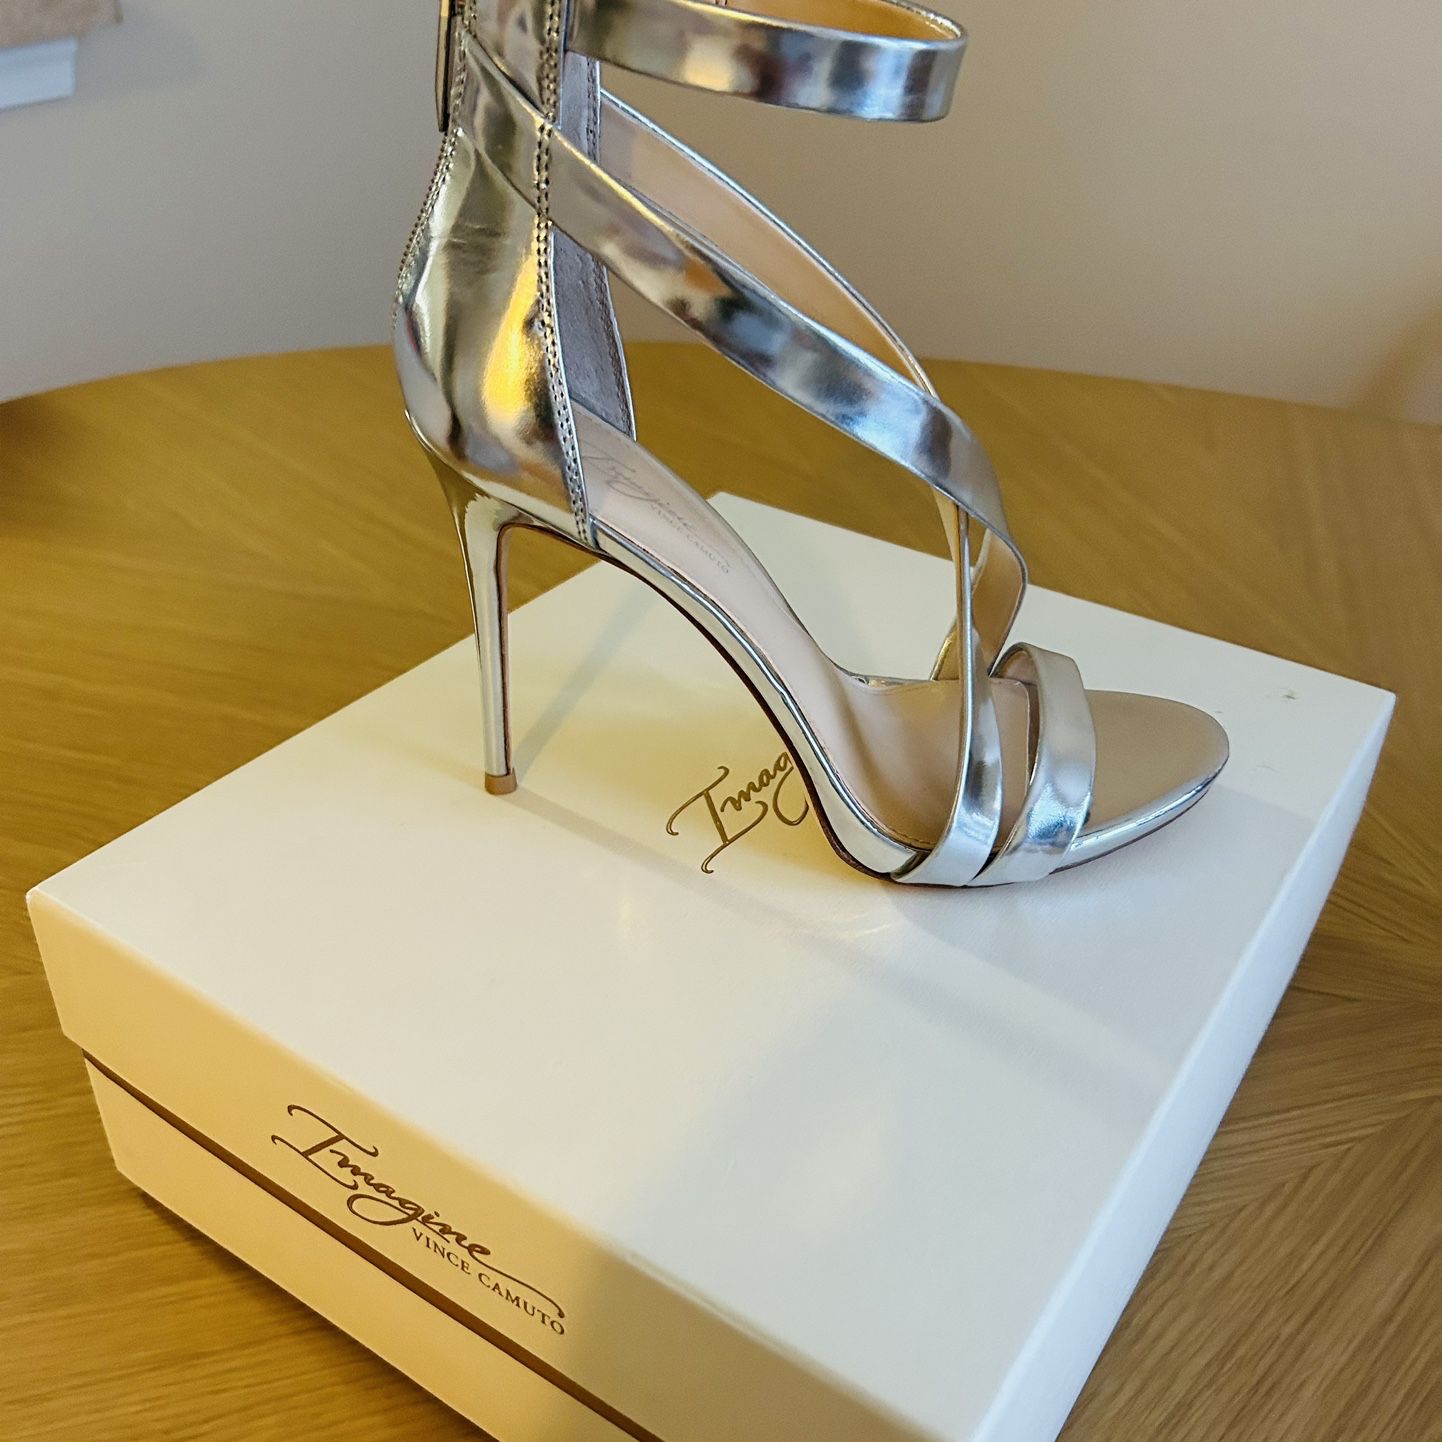 Imagine by VINCE CAMUTO heels, Size 7.5, They look